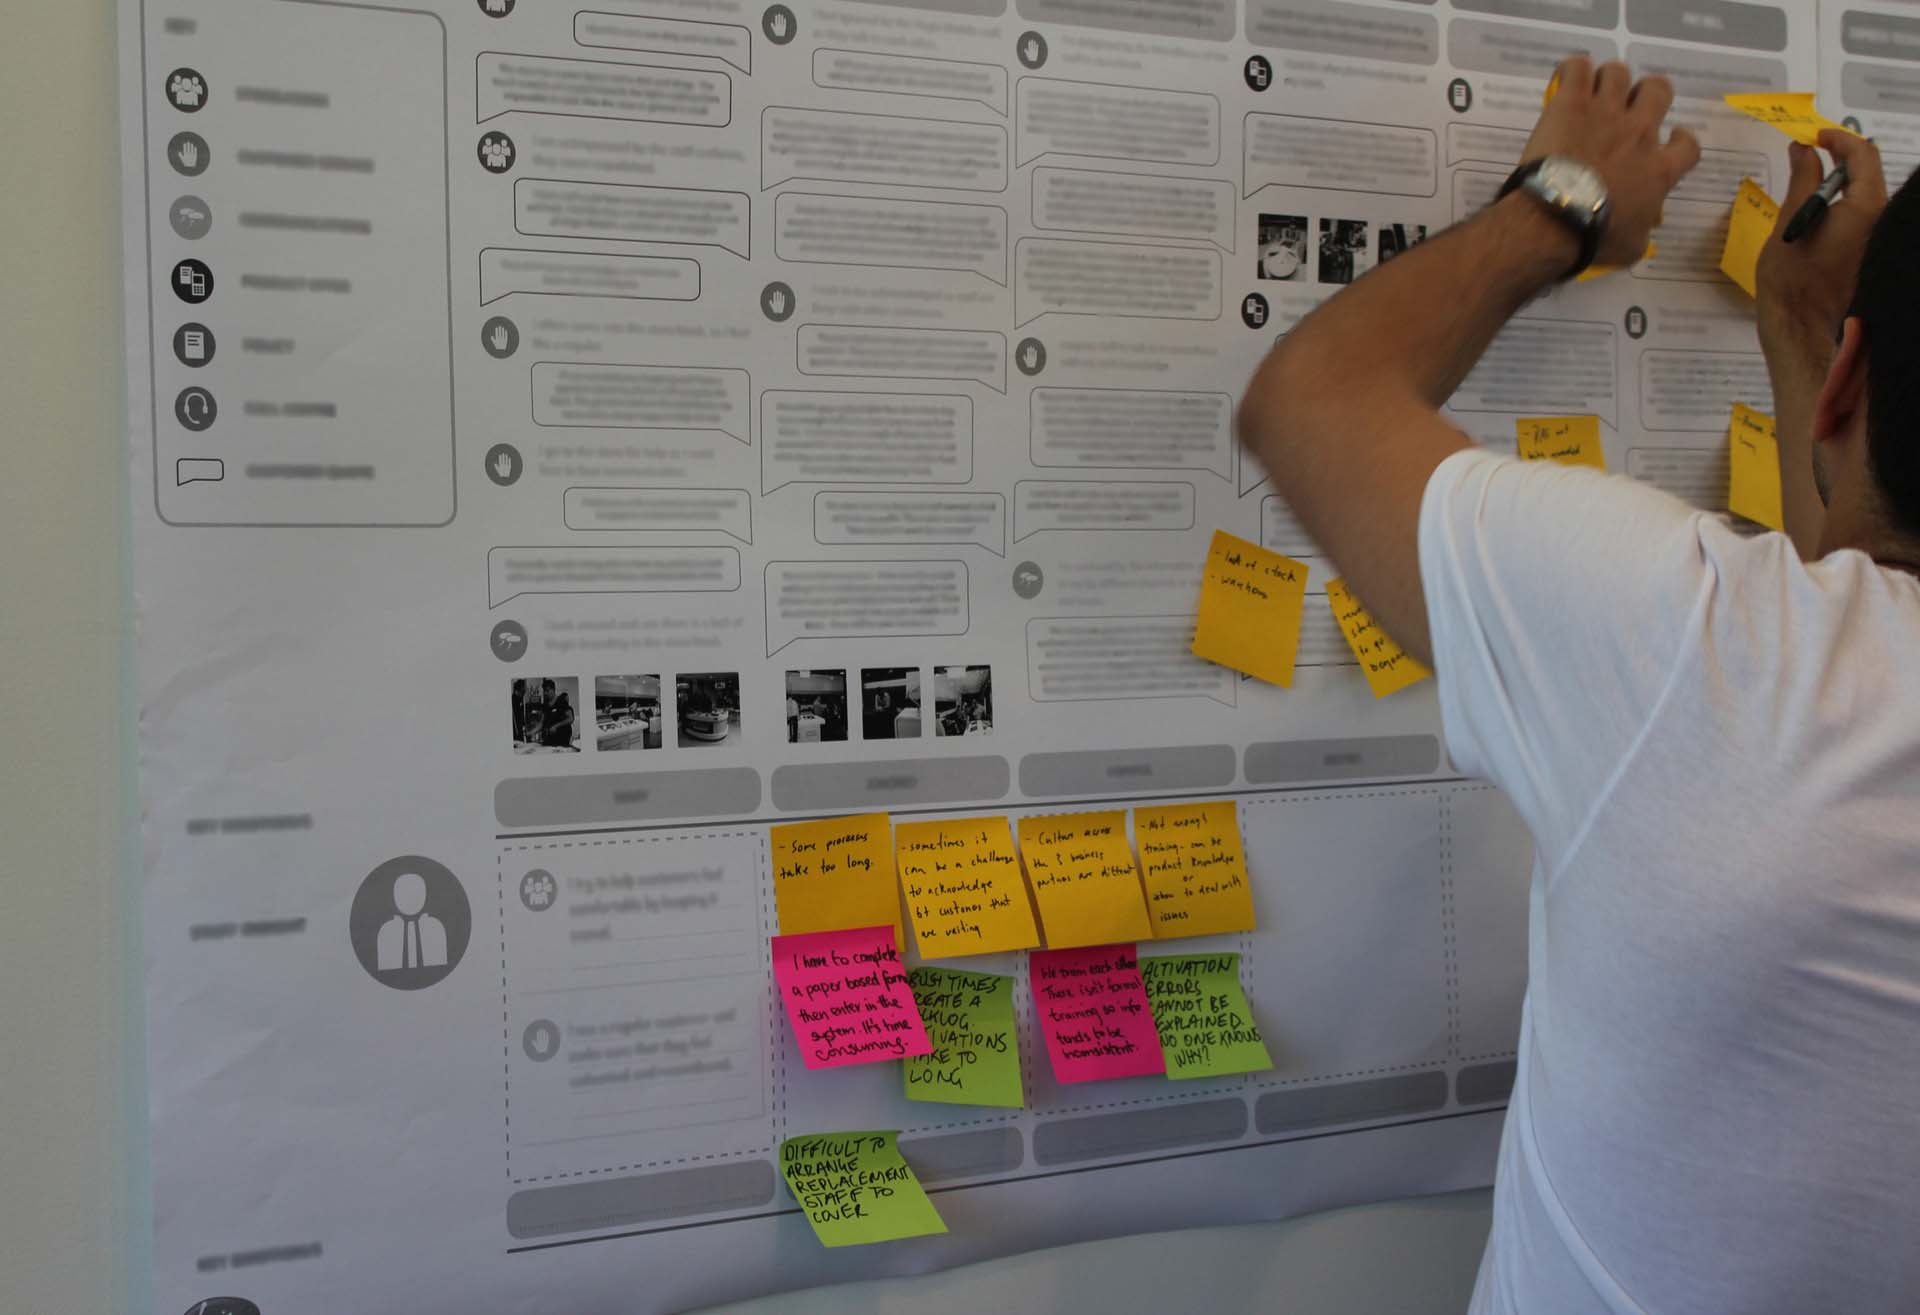 Proto putting notes on a Customer Journey Map